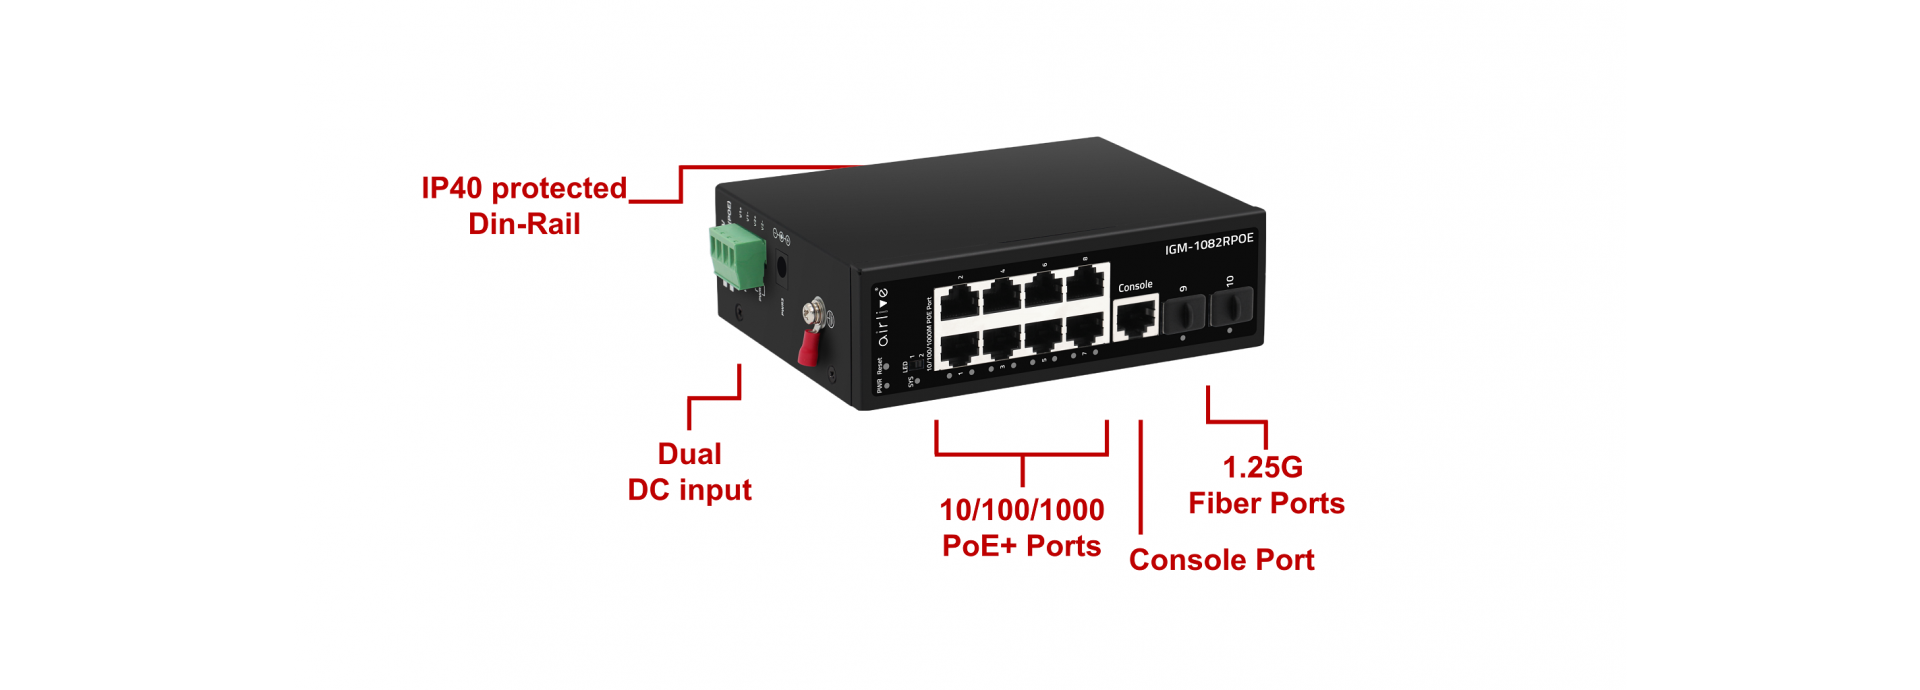 Reliable Industrial-grade Managed POE Switch for extreme environment With VLAN and QoS